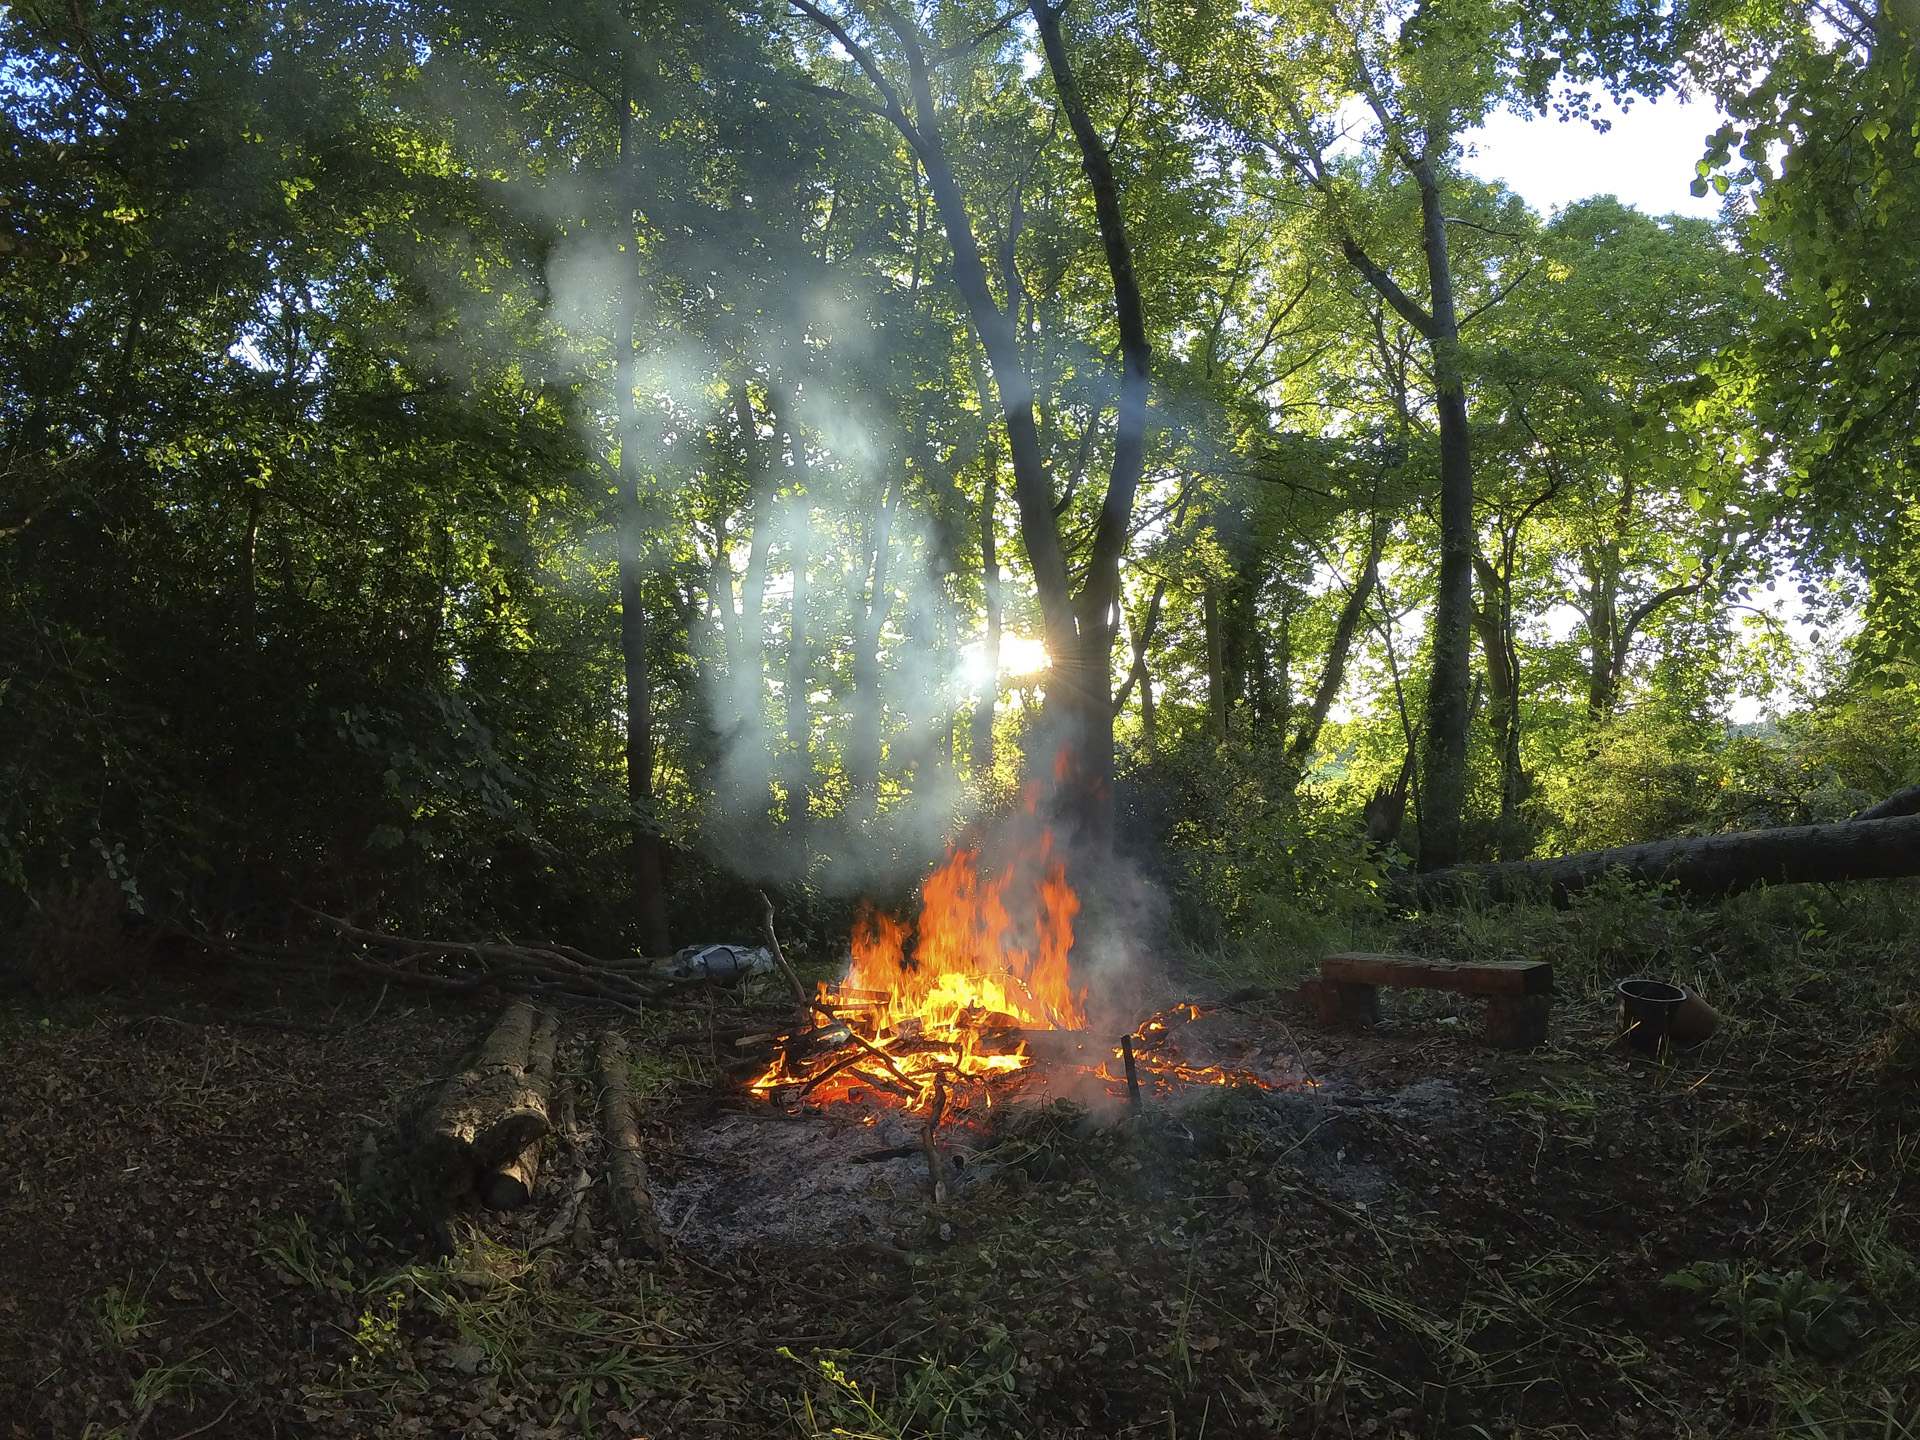 A backlit fire in the woods, taken with the Insta360 Go 3S